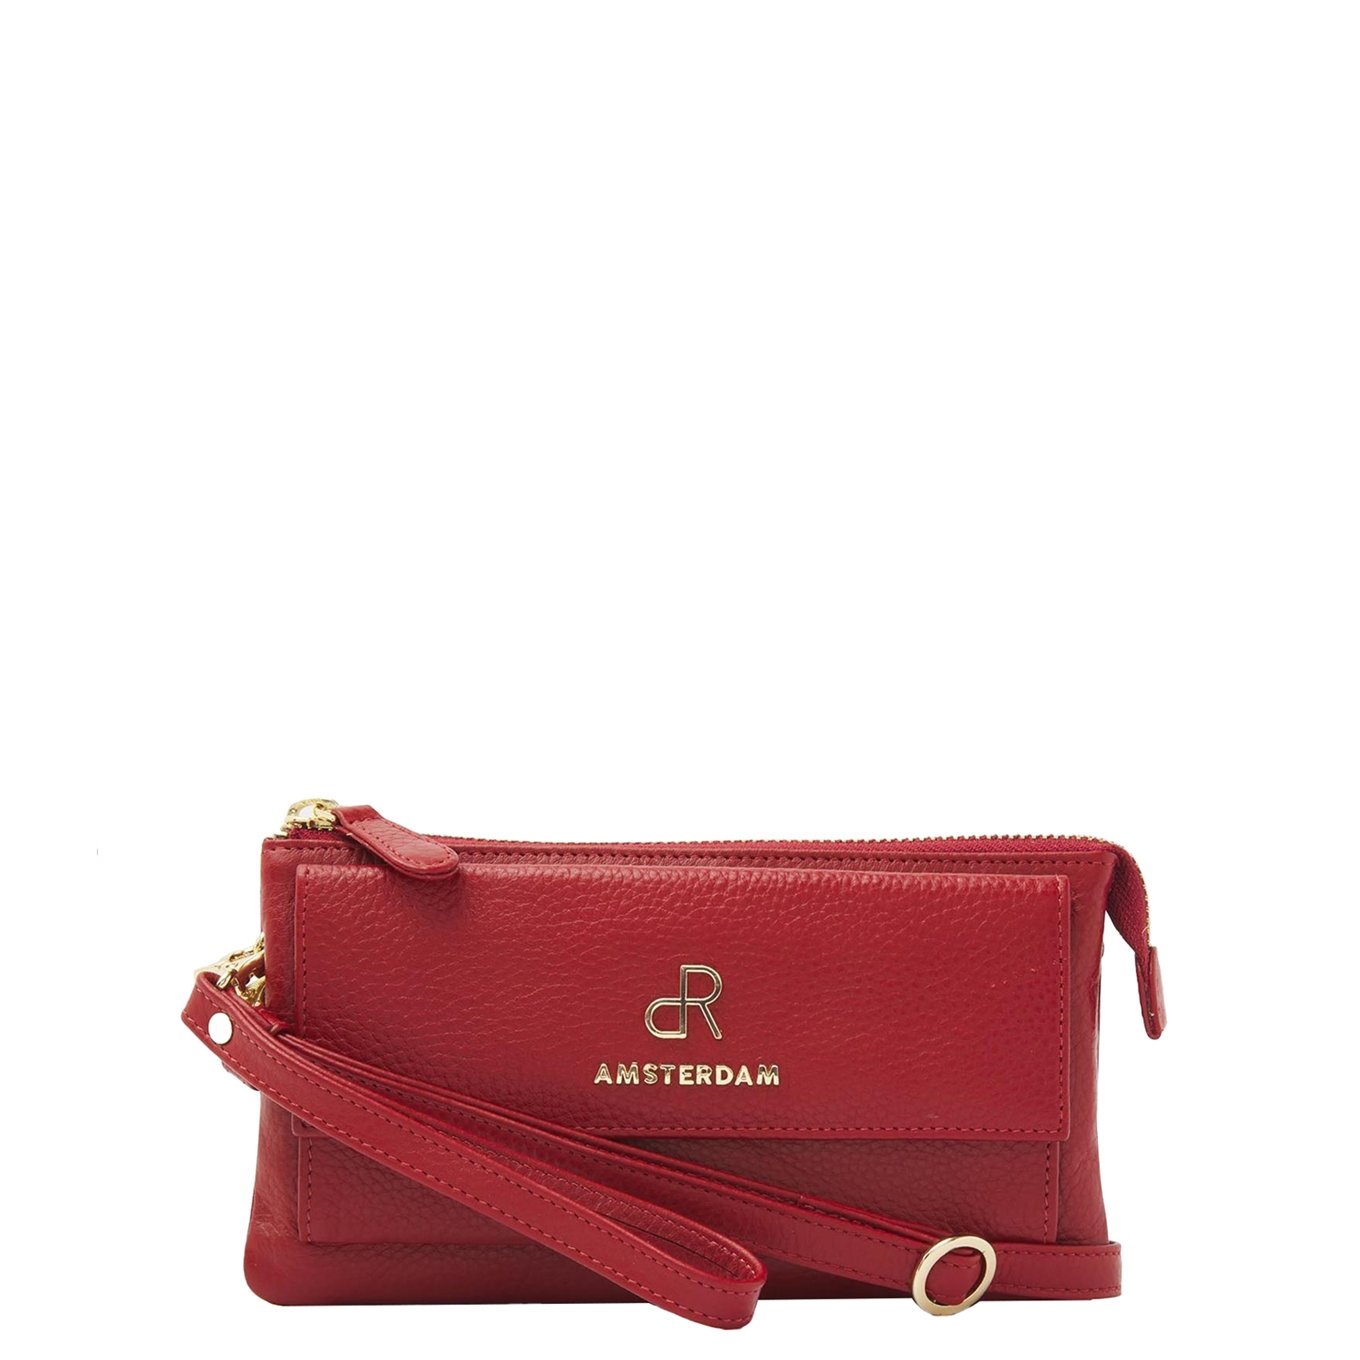 DR Amsterdam Mint Shoulderbag/Clutch tango red